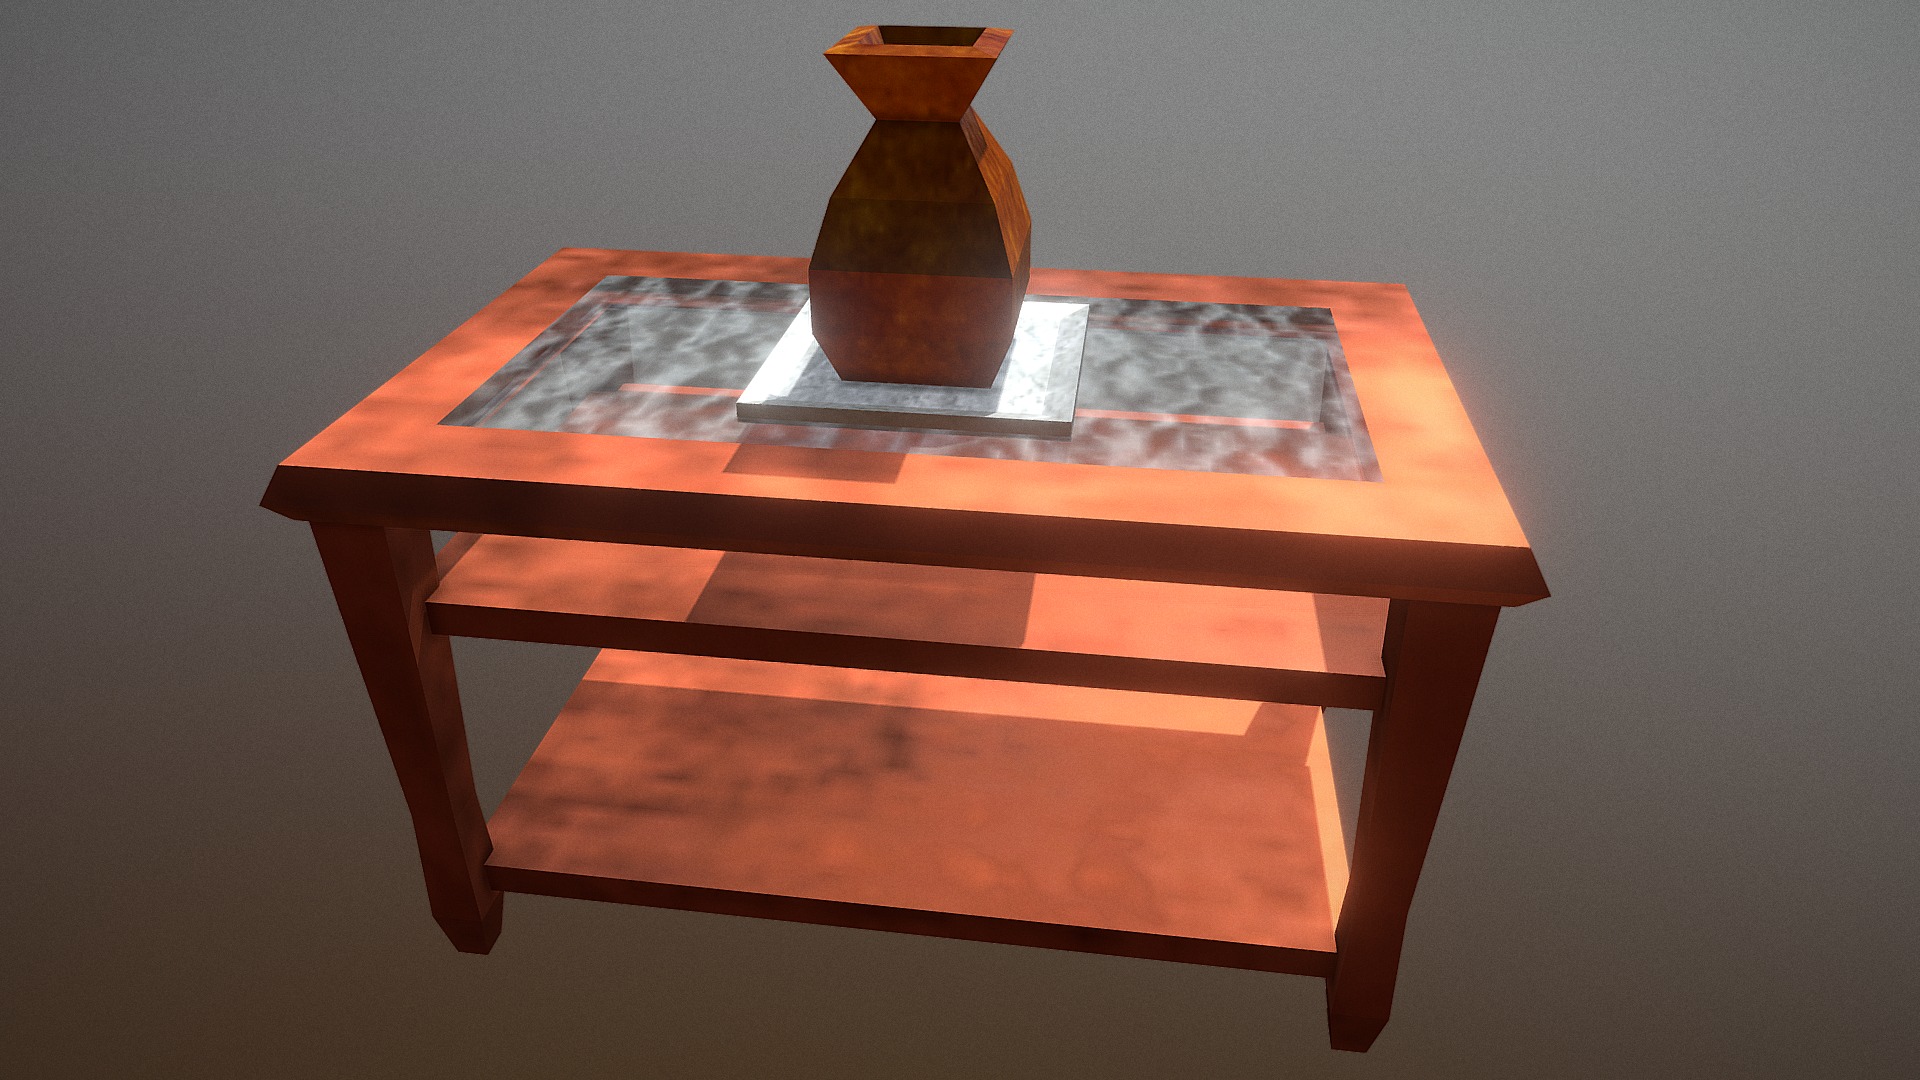 3D model End Table: Household Props Challenge Day 15 - This is a 3D model of the End Table: Household Props Challenge Day 15. The 3D model is about a wooden table with a vase on top.